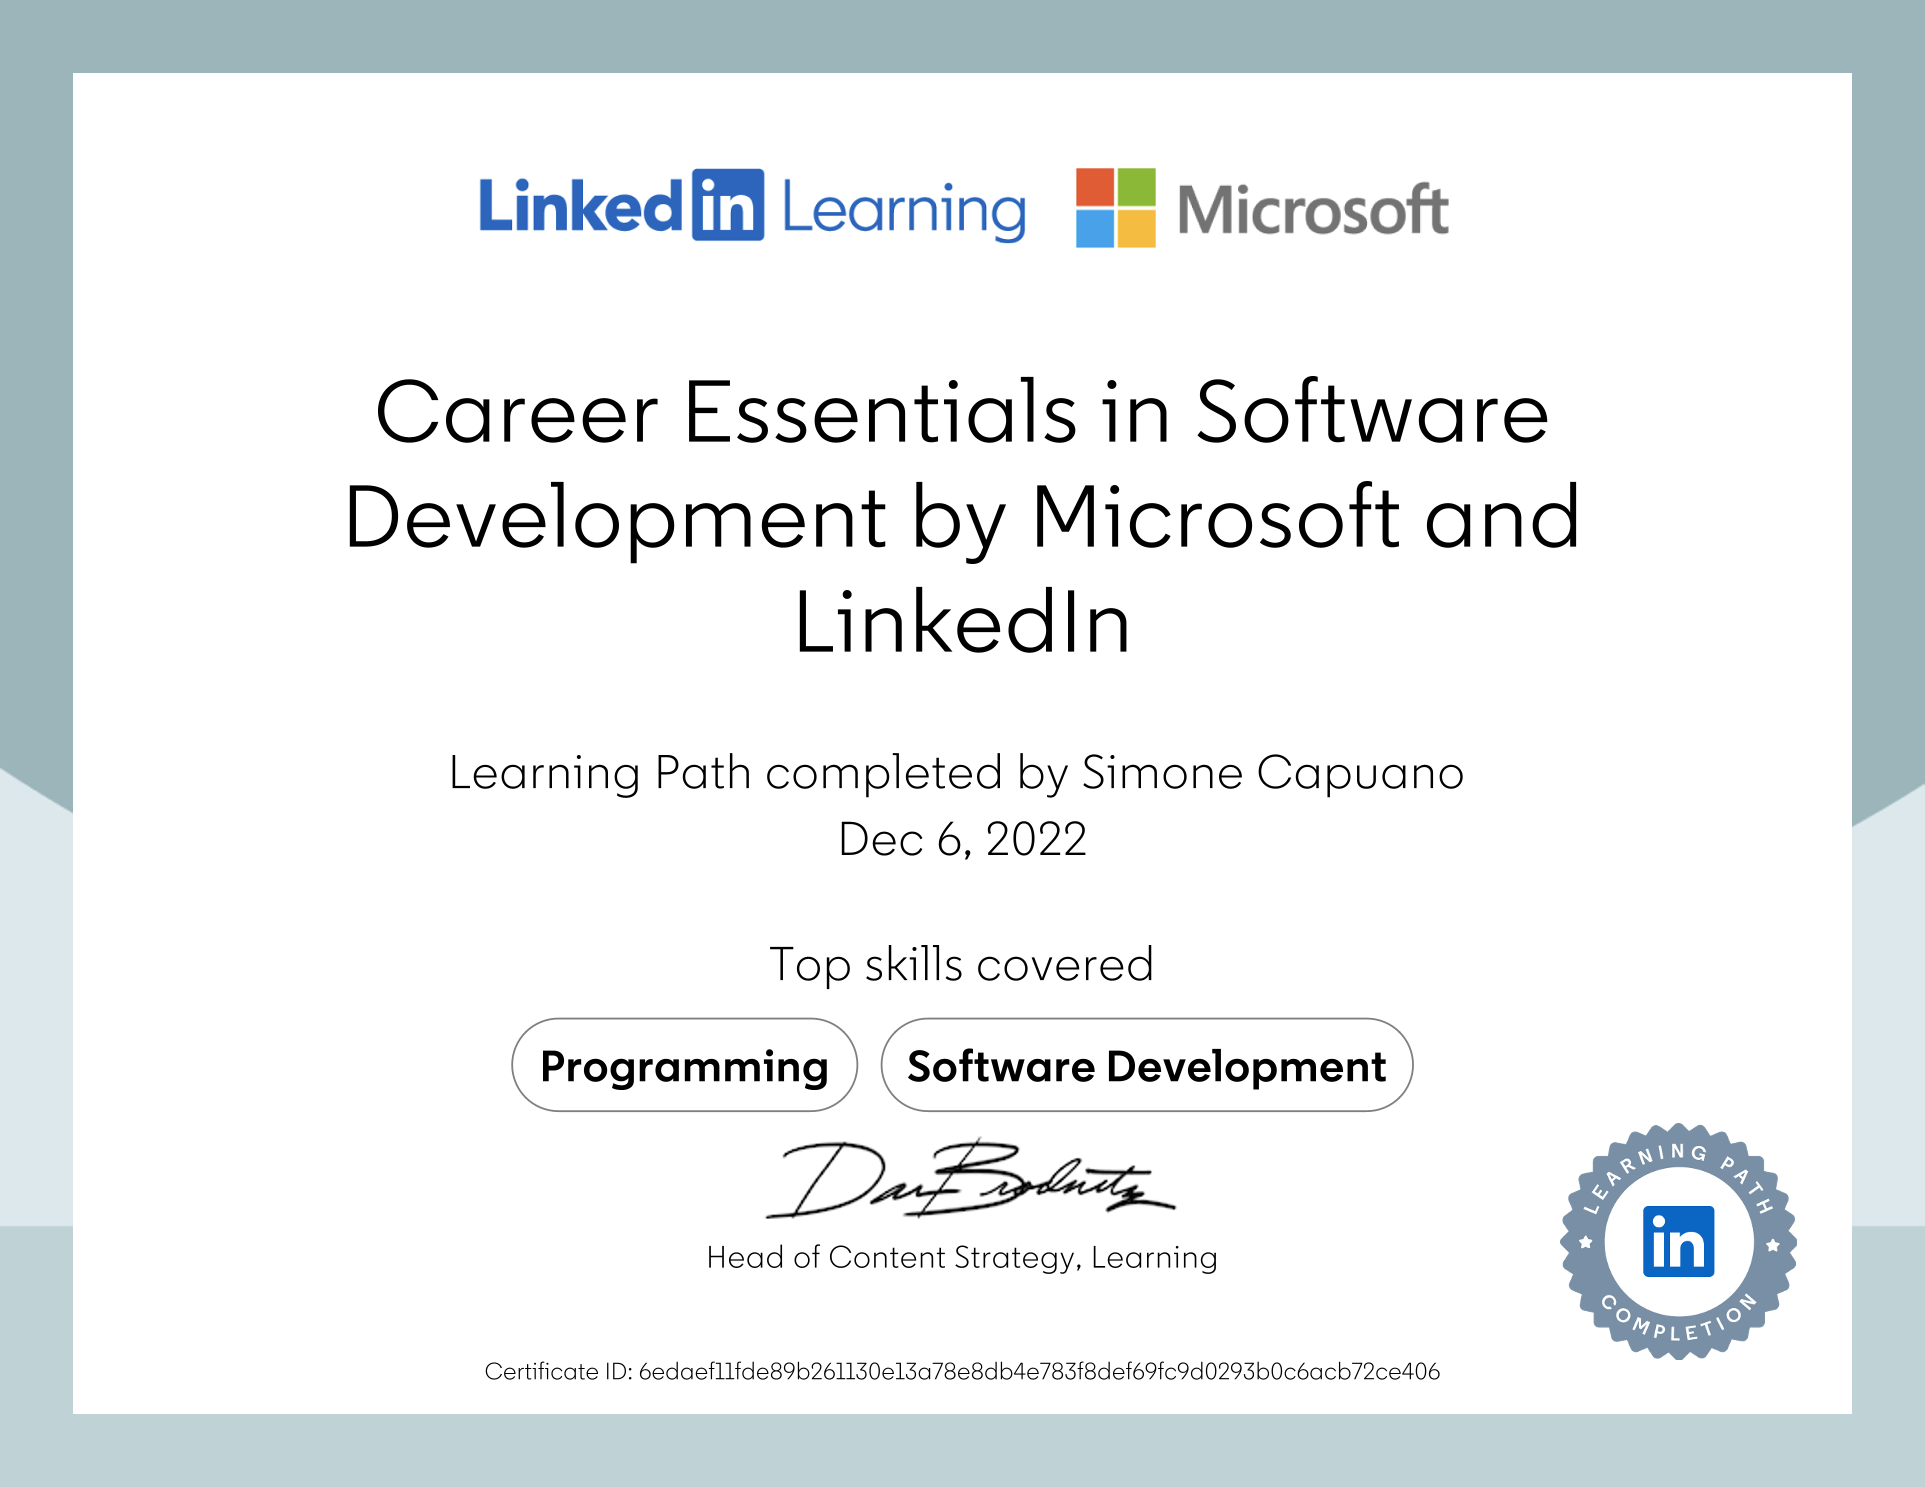 Simone Capuano on LinkedIn: Certificate of Completion